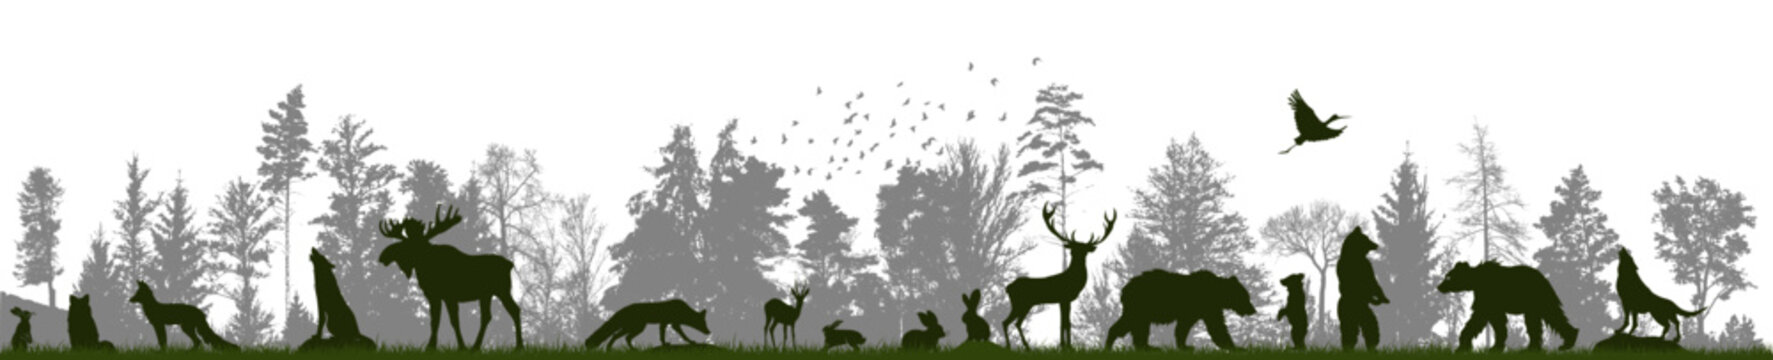 Forest landscape with silhouettes of animals. Vector illustration